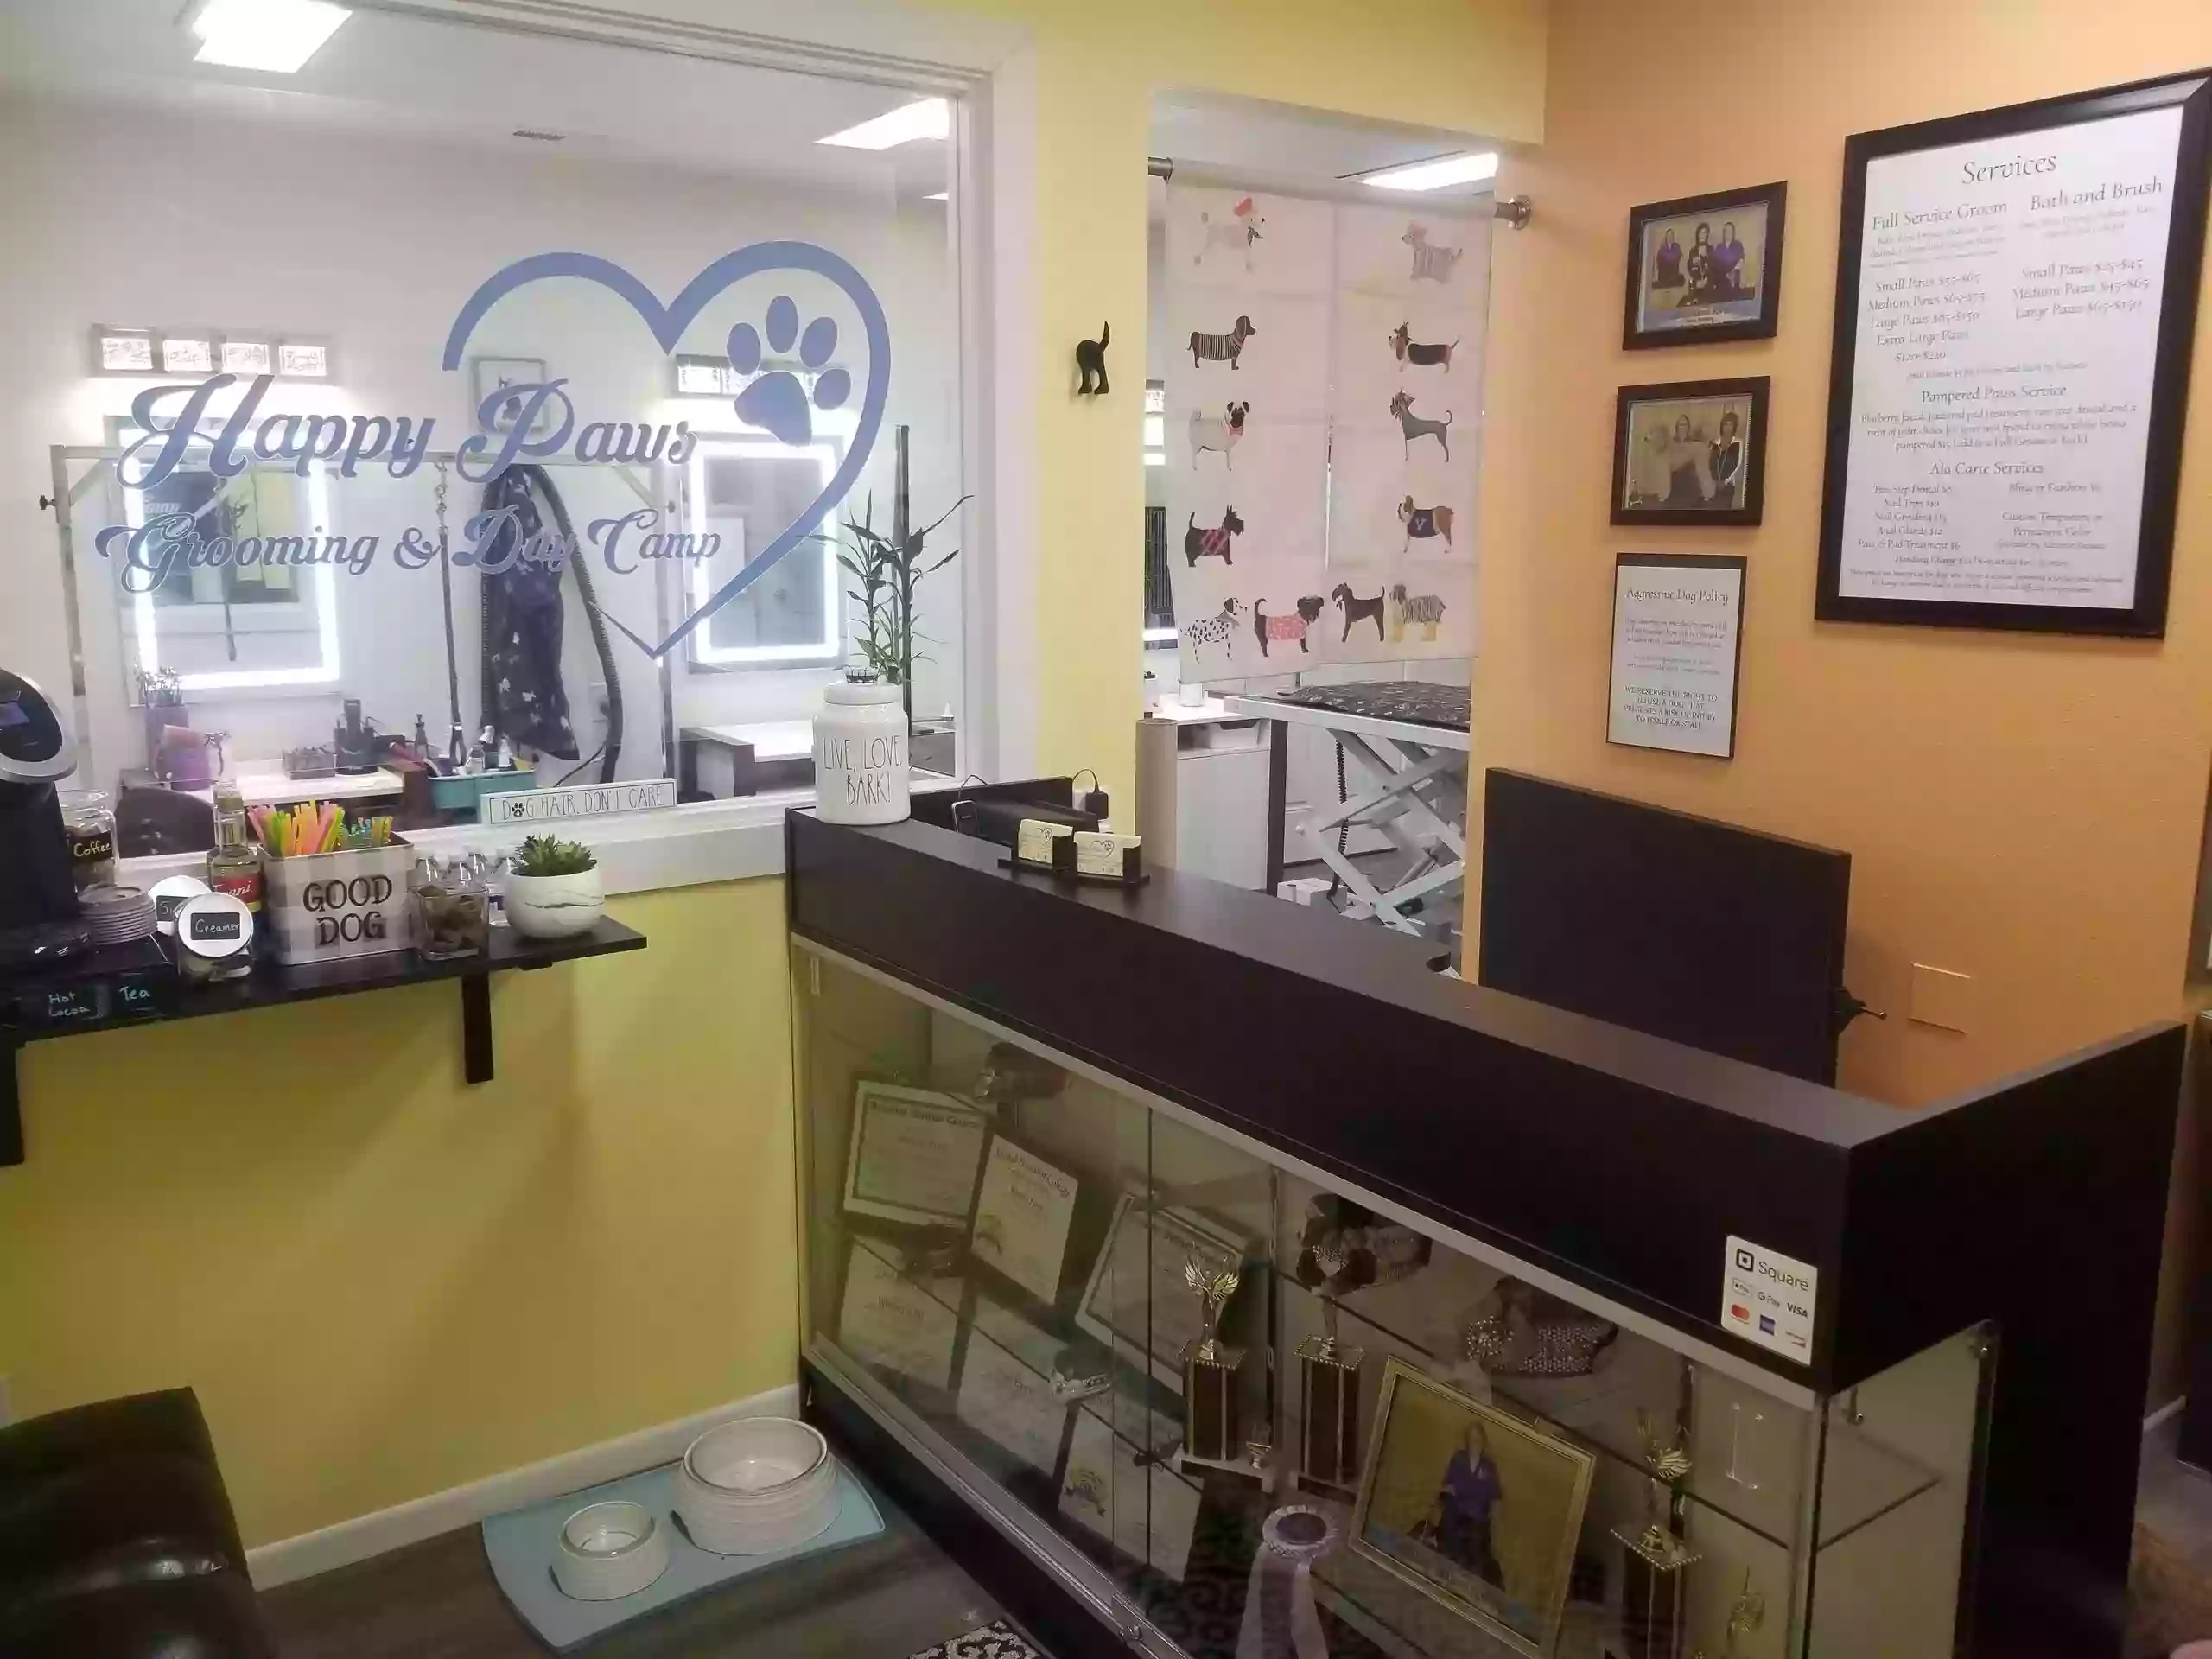 Happy Paws Dog Grooming